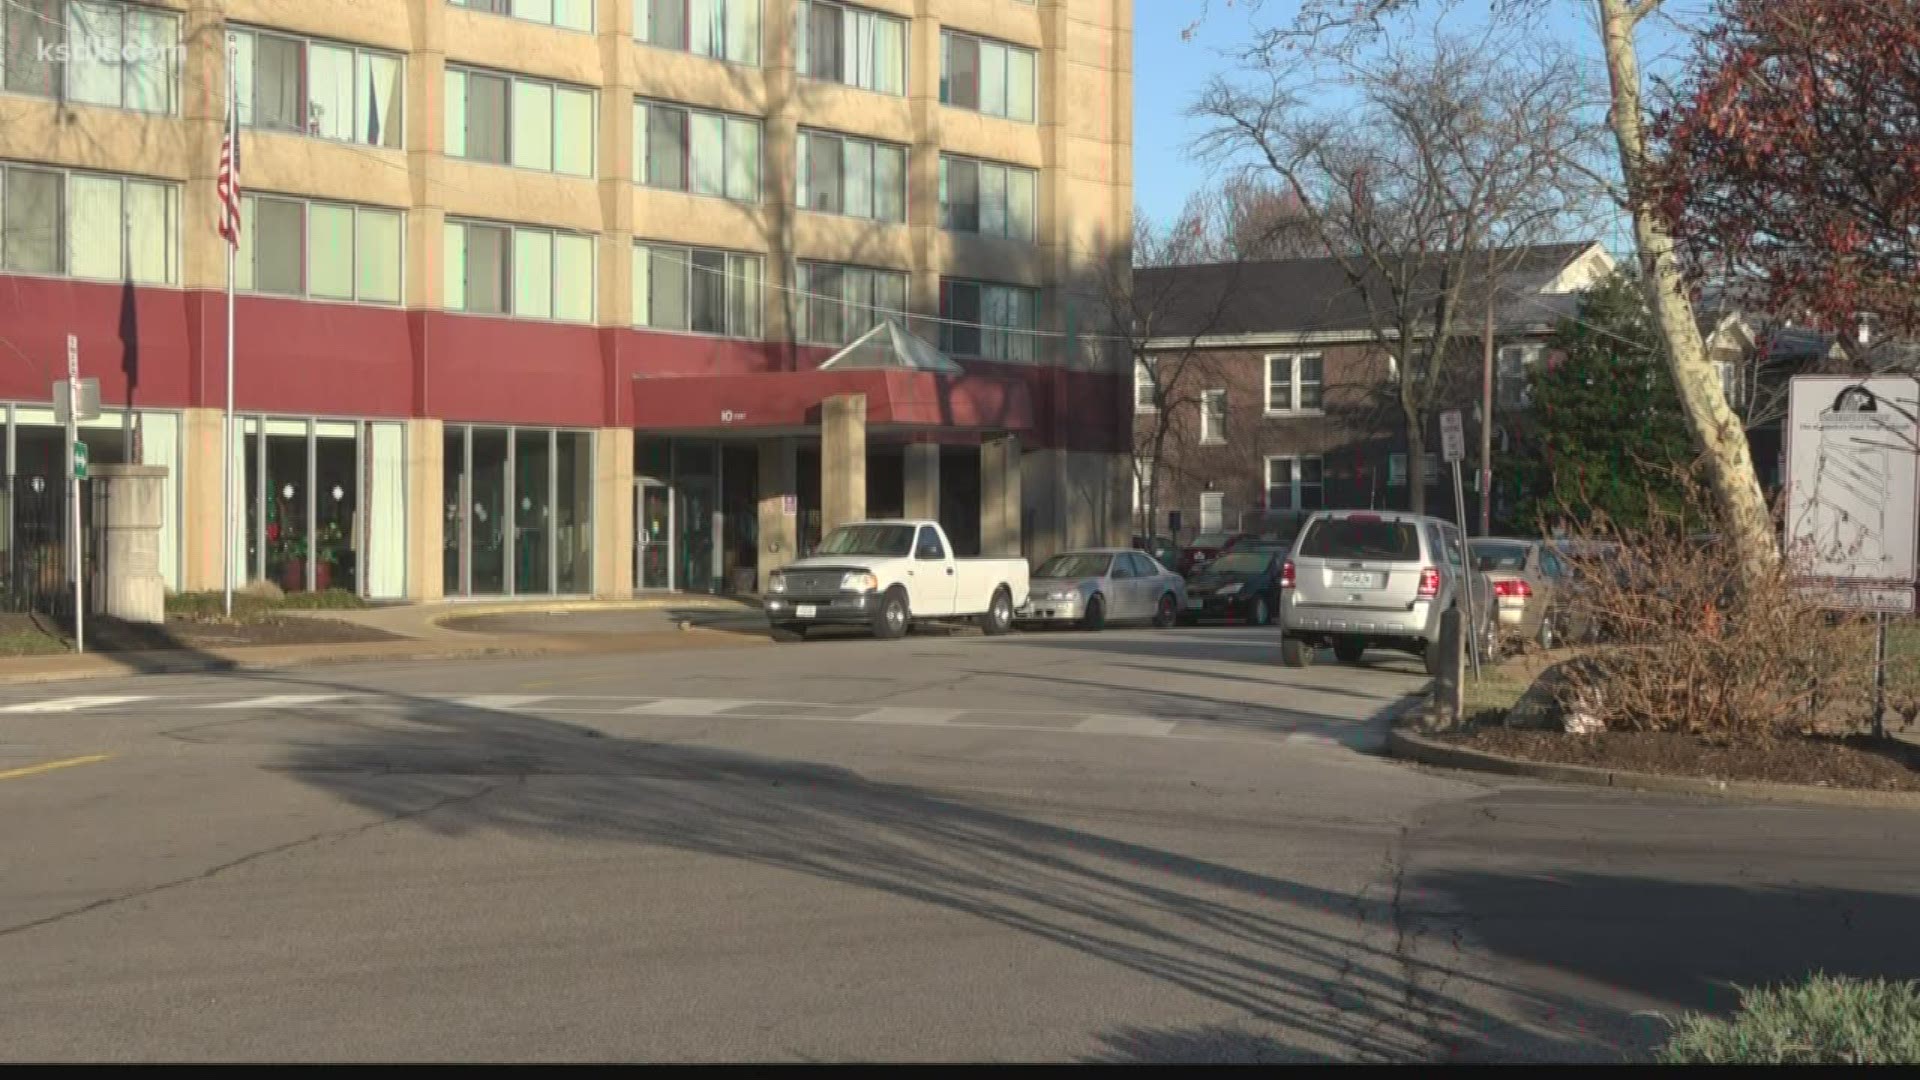 2 students were robbed at gunpoint near the Delmar Loop